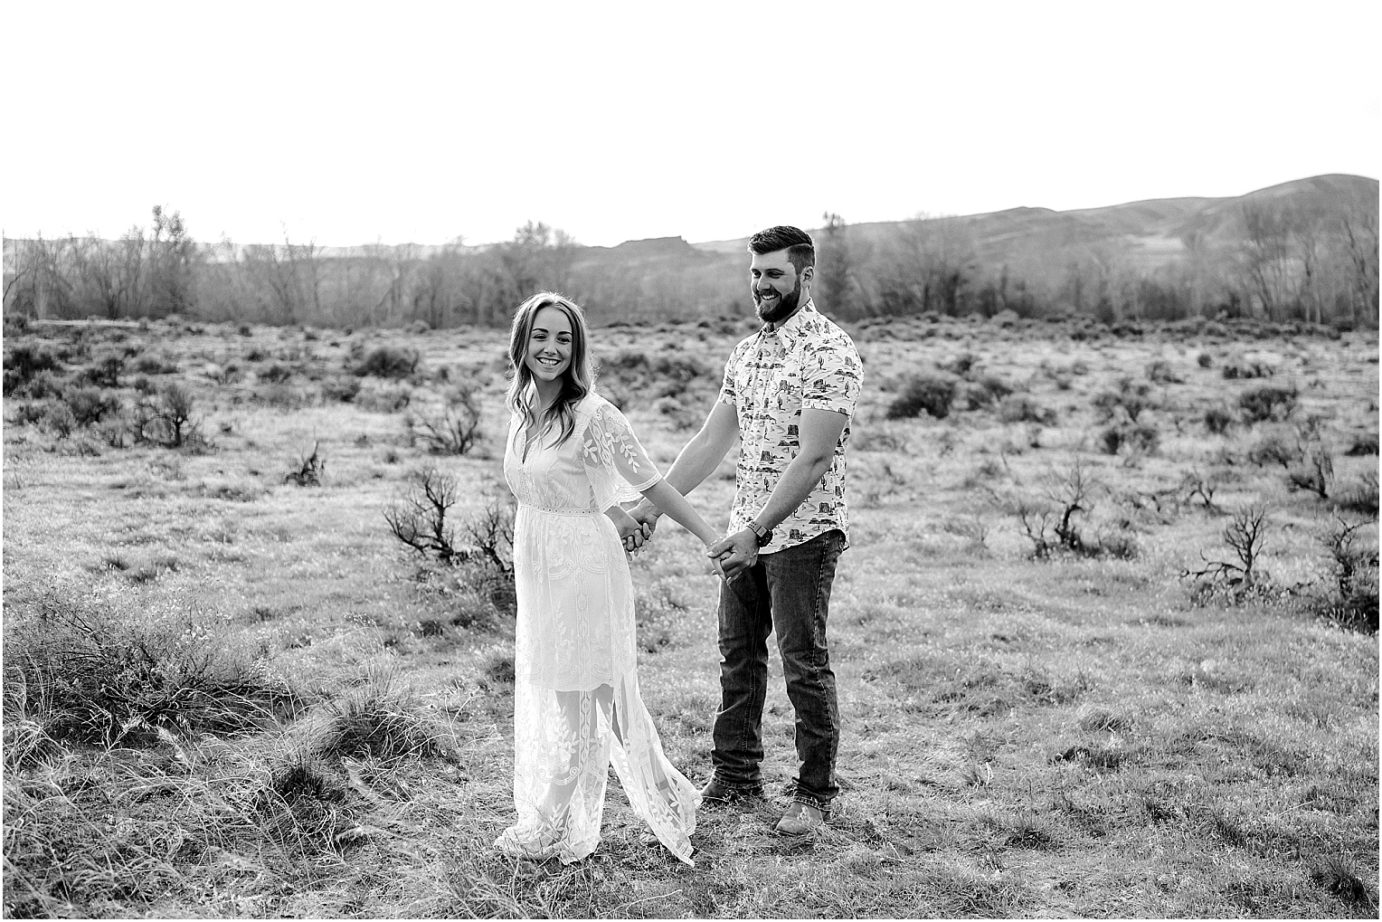 eastern washington engagement session PNW photographer Travis and arianna dancing in a field